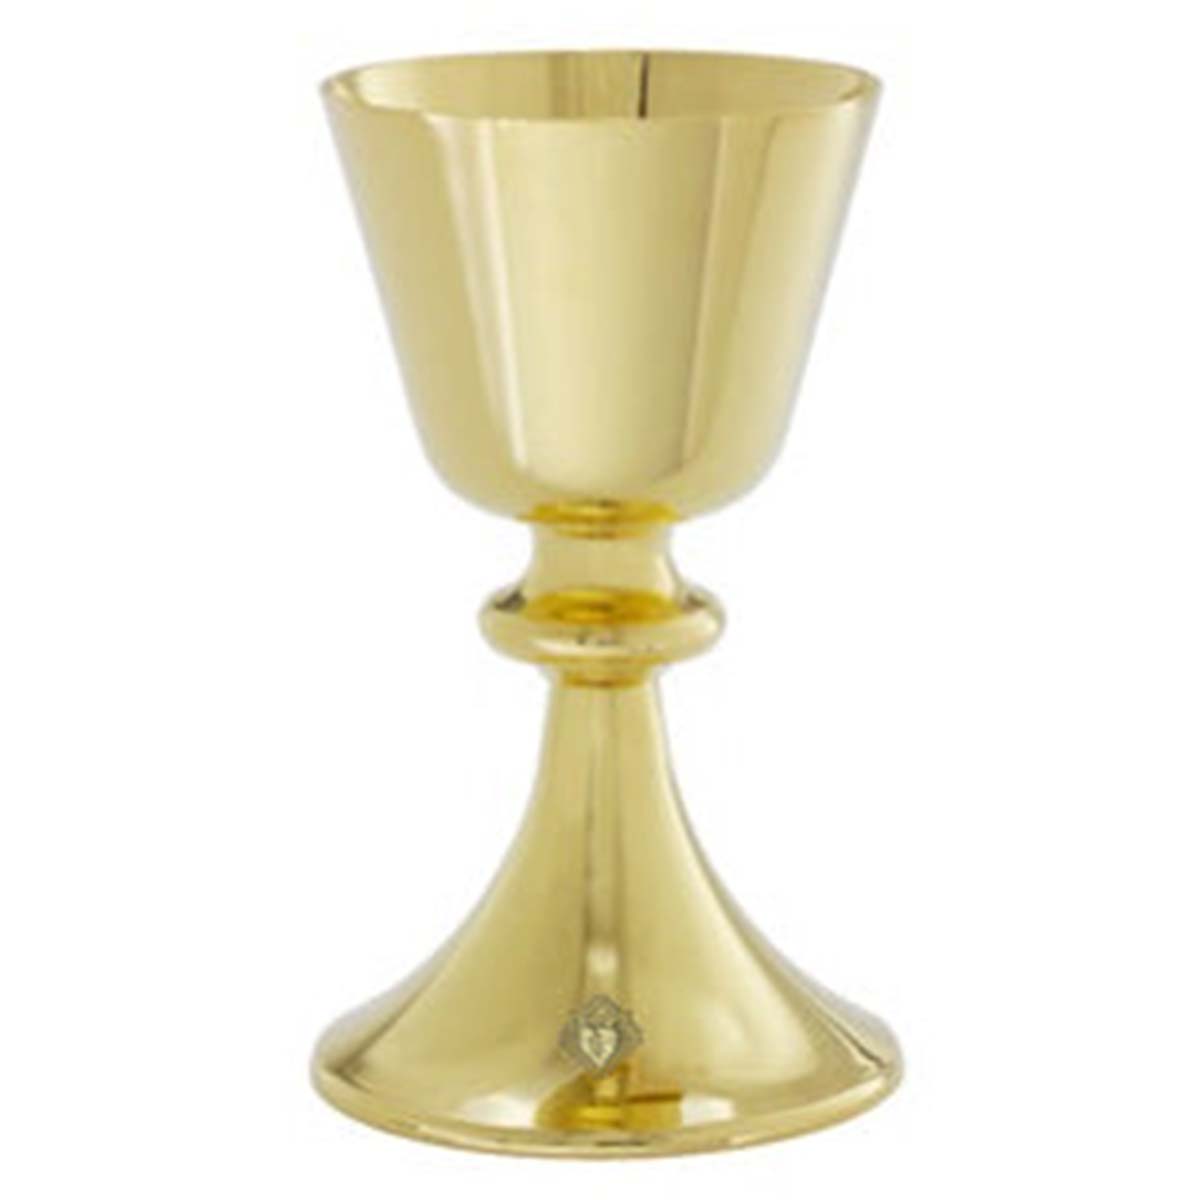 8" Chalice with Scale Paten & emblem